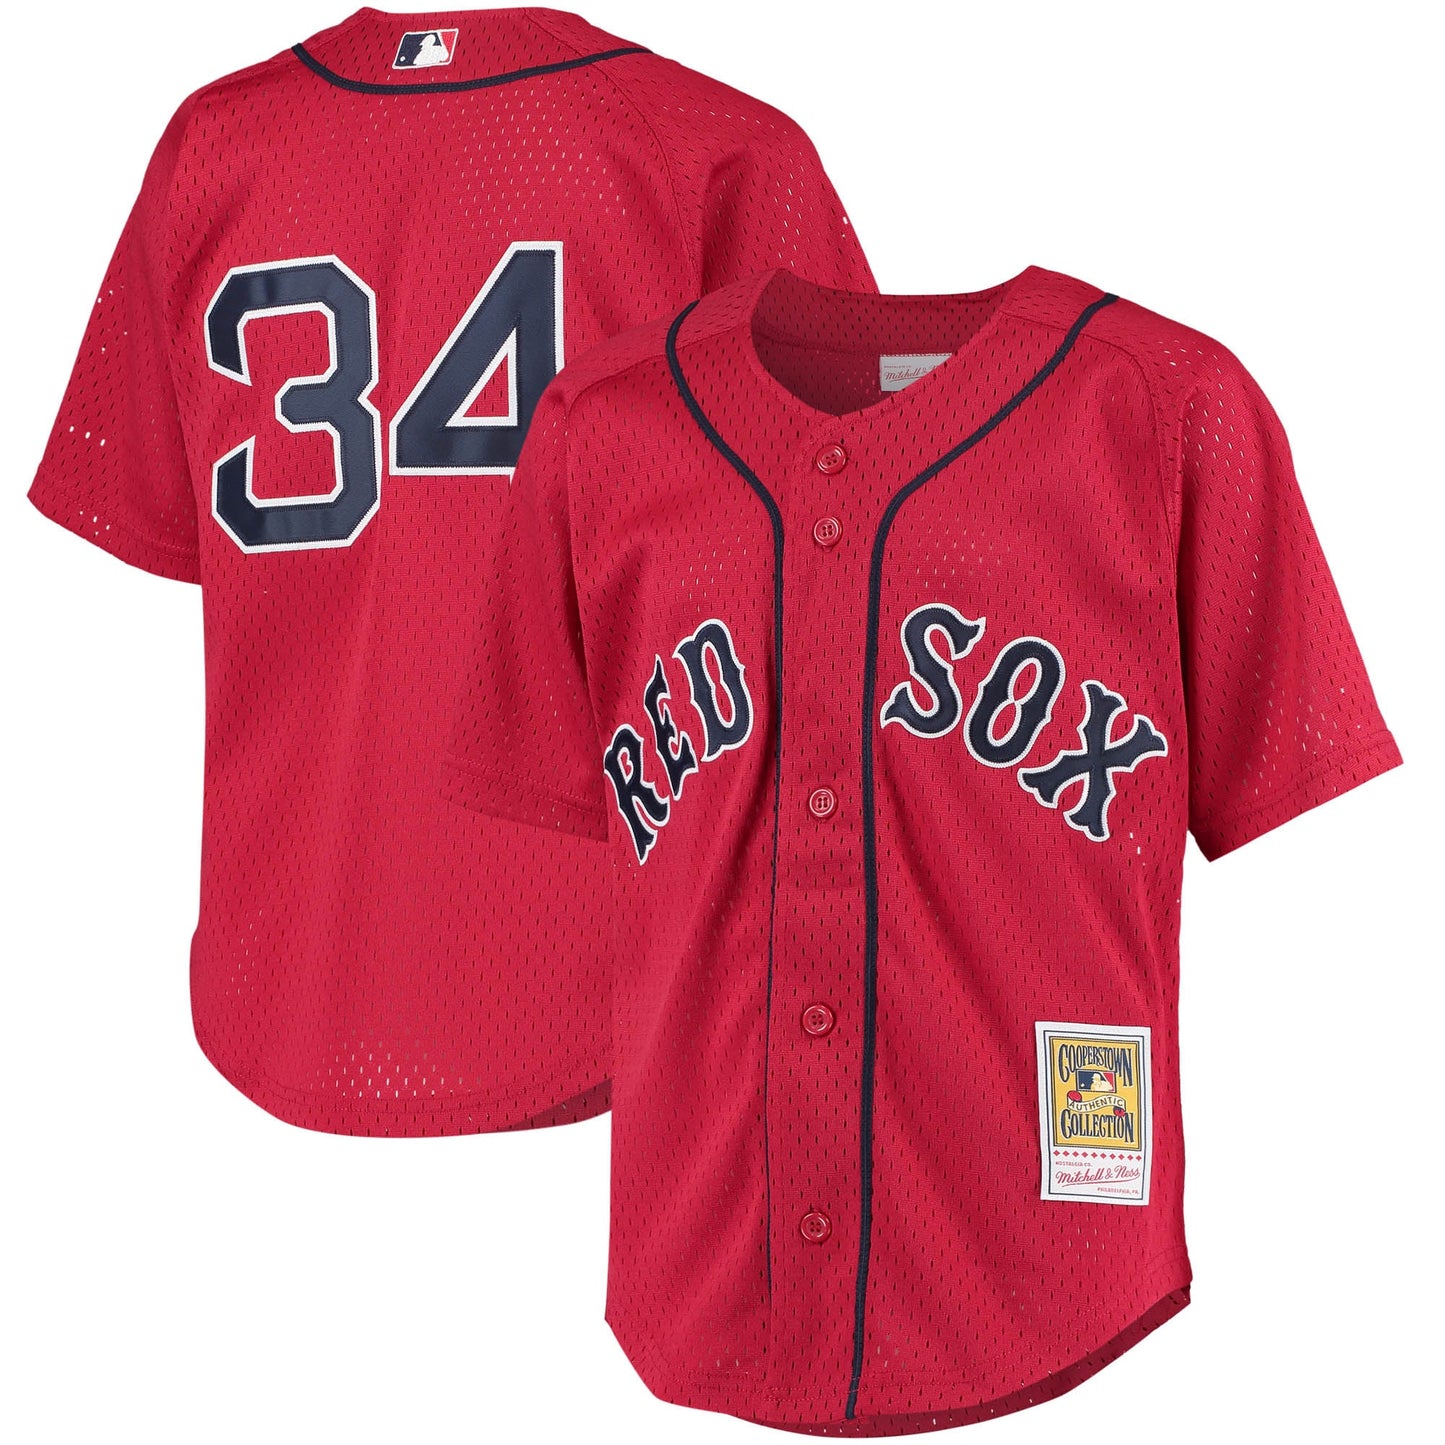 David Ortiz Boston Red Sox Mitchell & Ness Youth Cooperstown Collection Batting Practice Jersey - Red